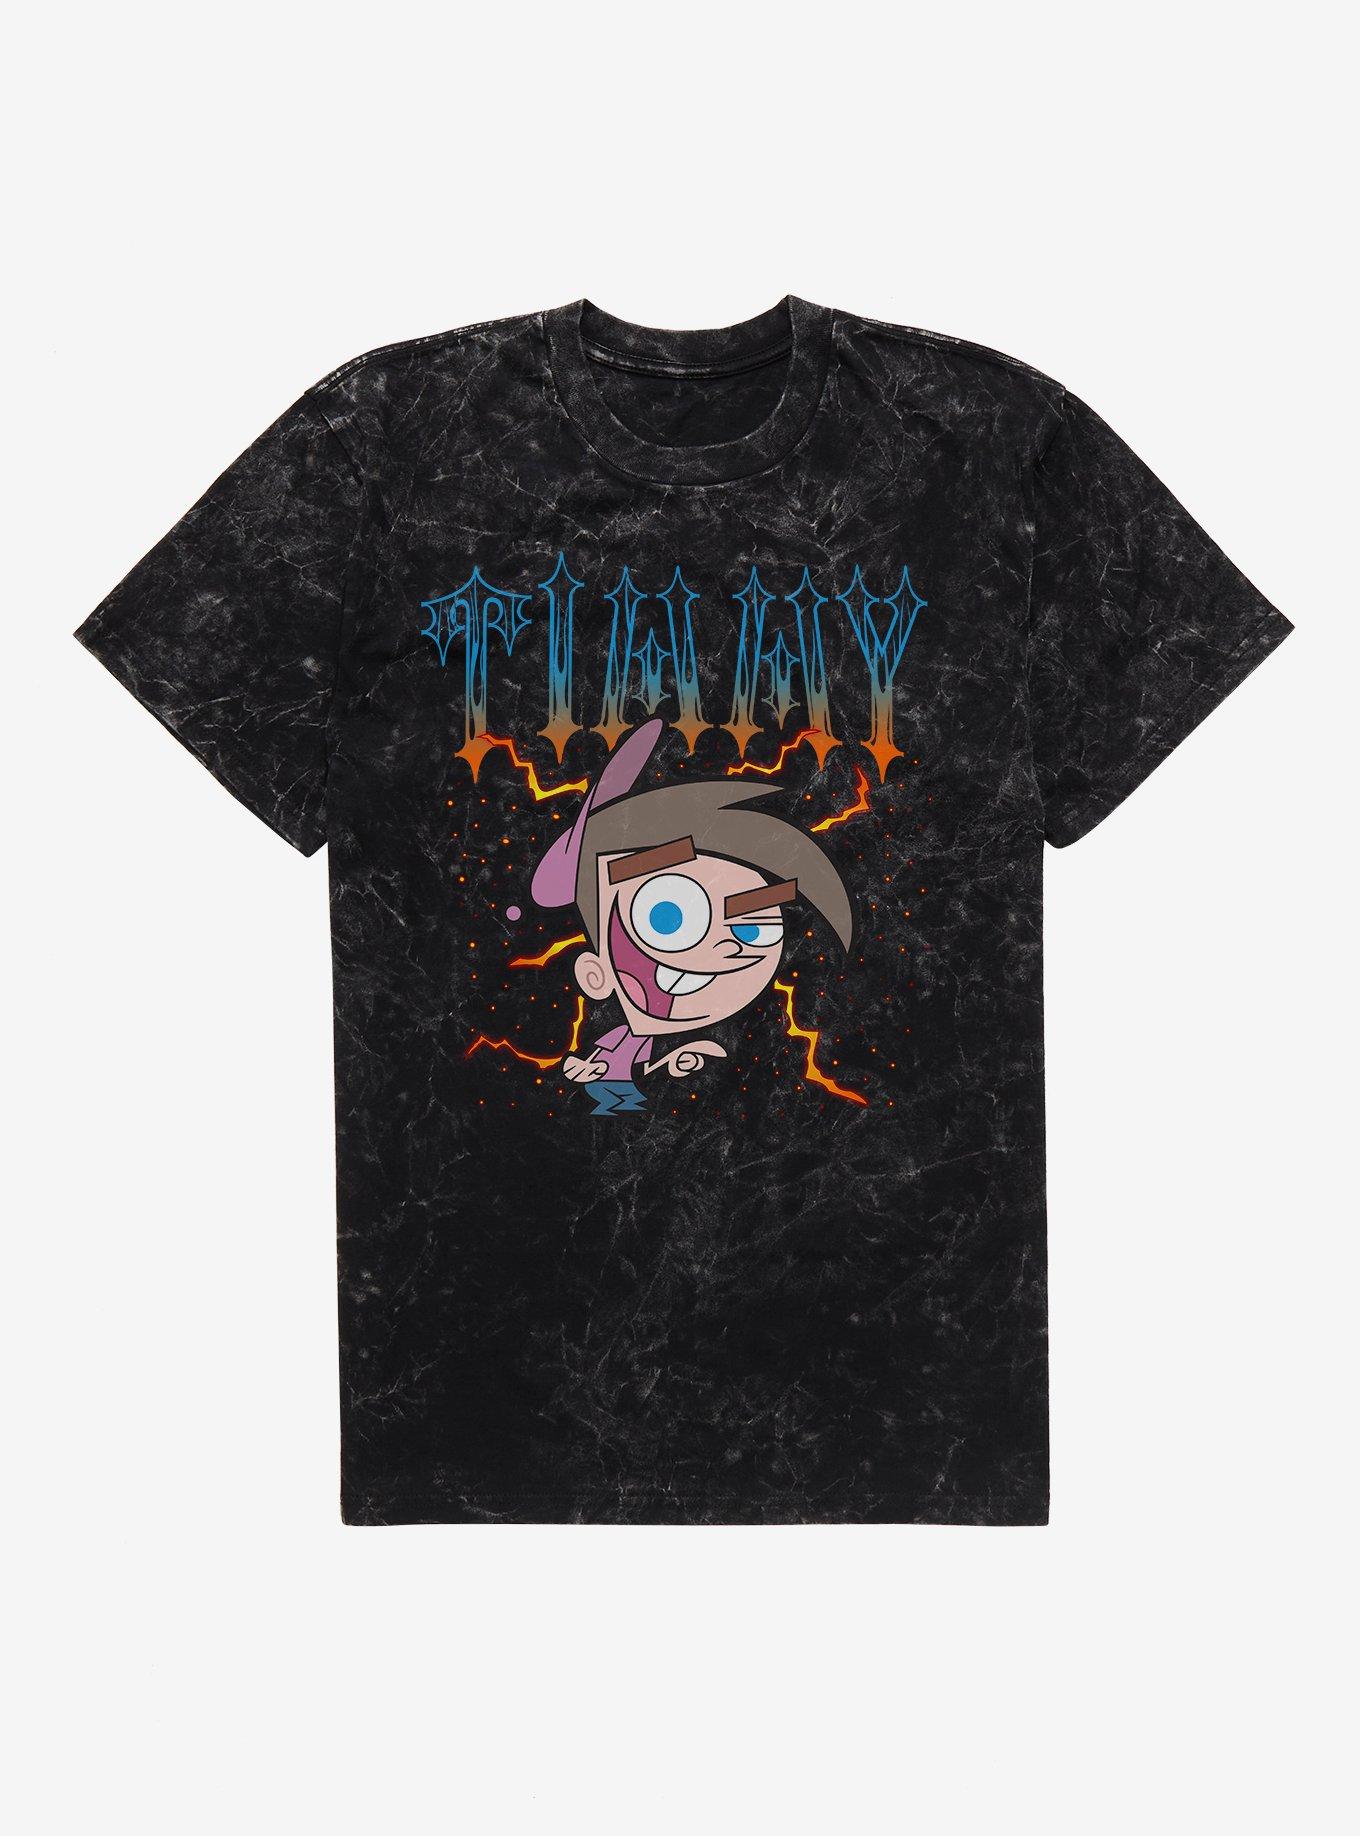 The Fairly Oddparents Timmy Turner Mineral Wash T-Shirt